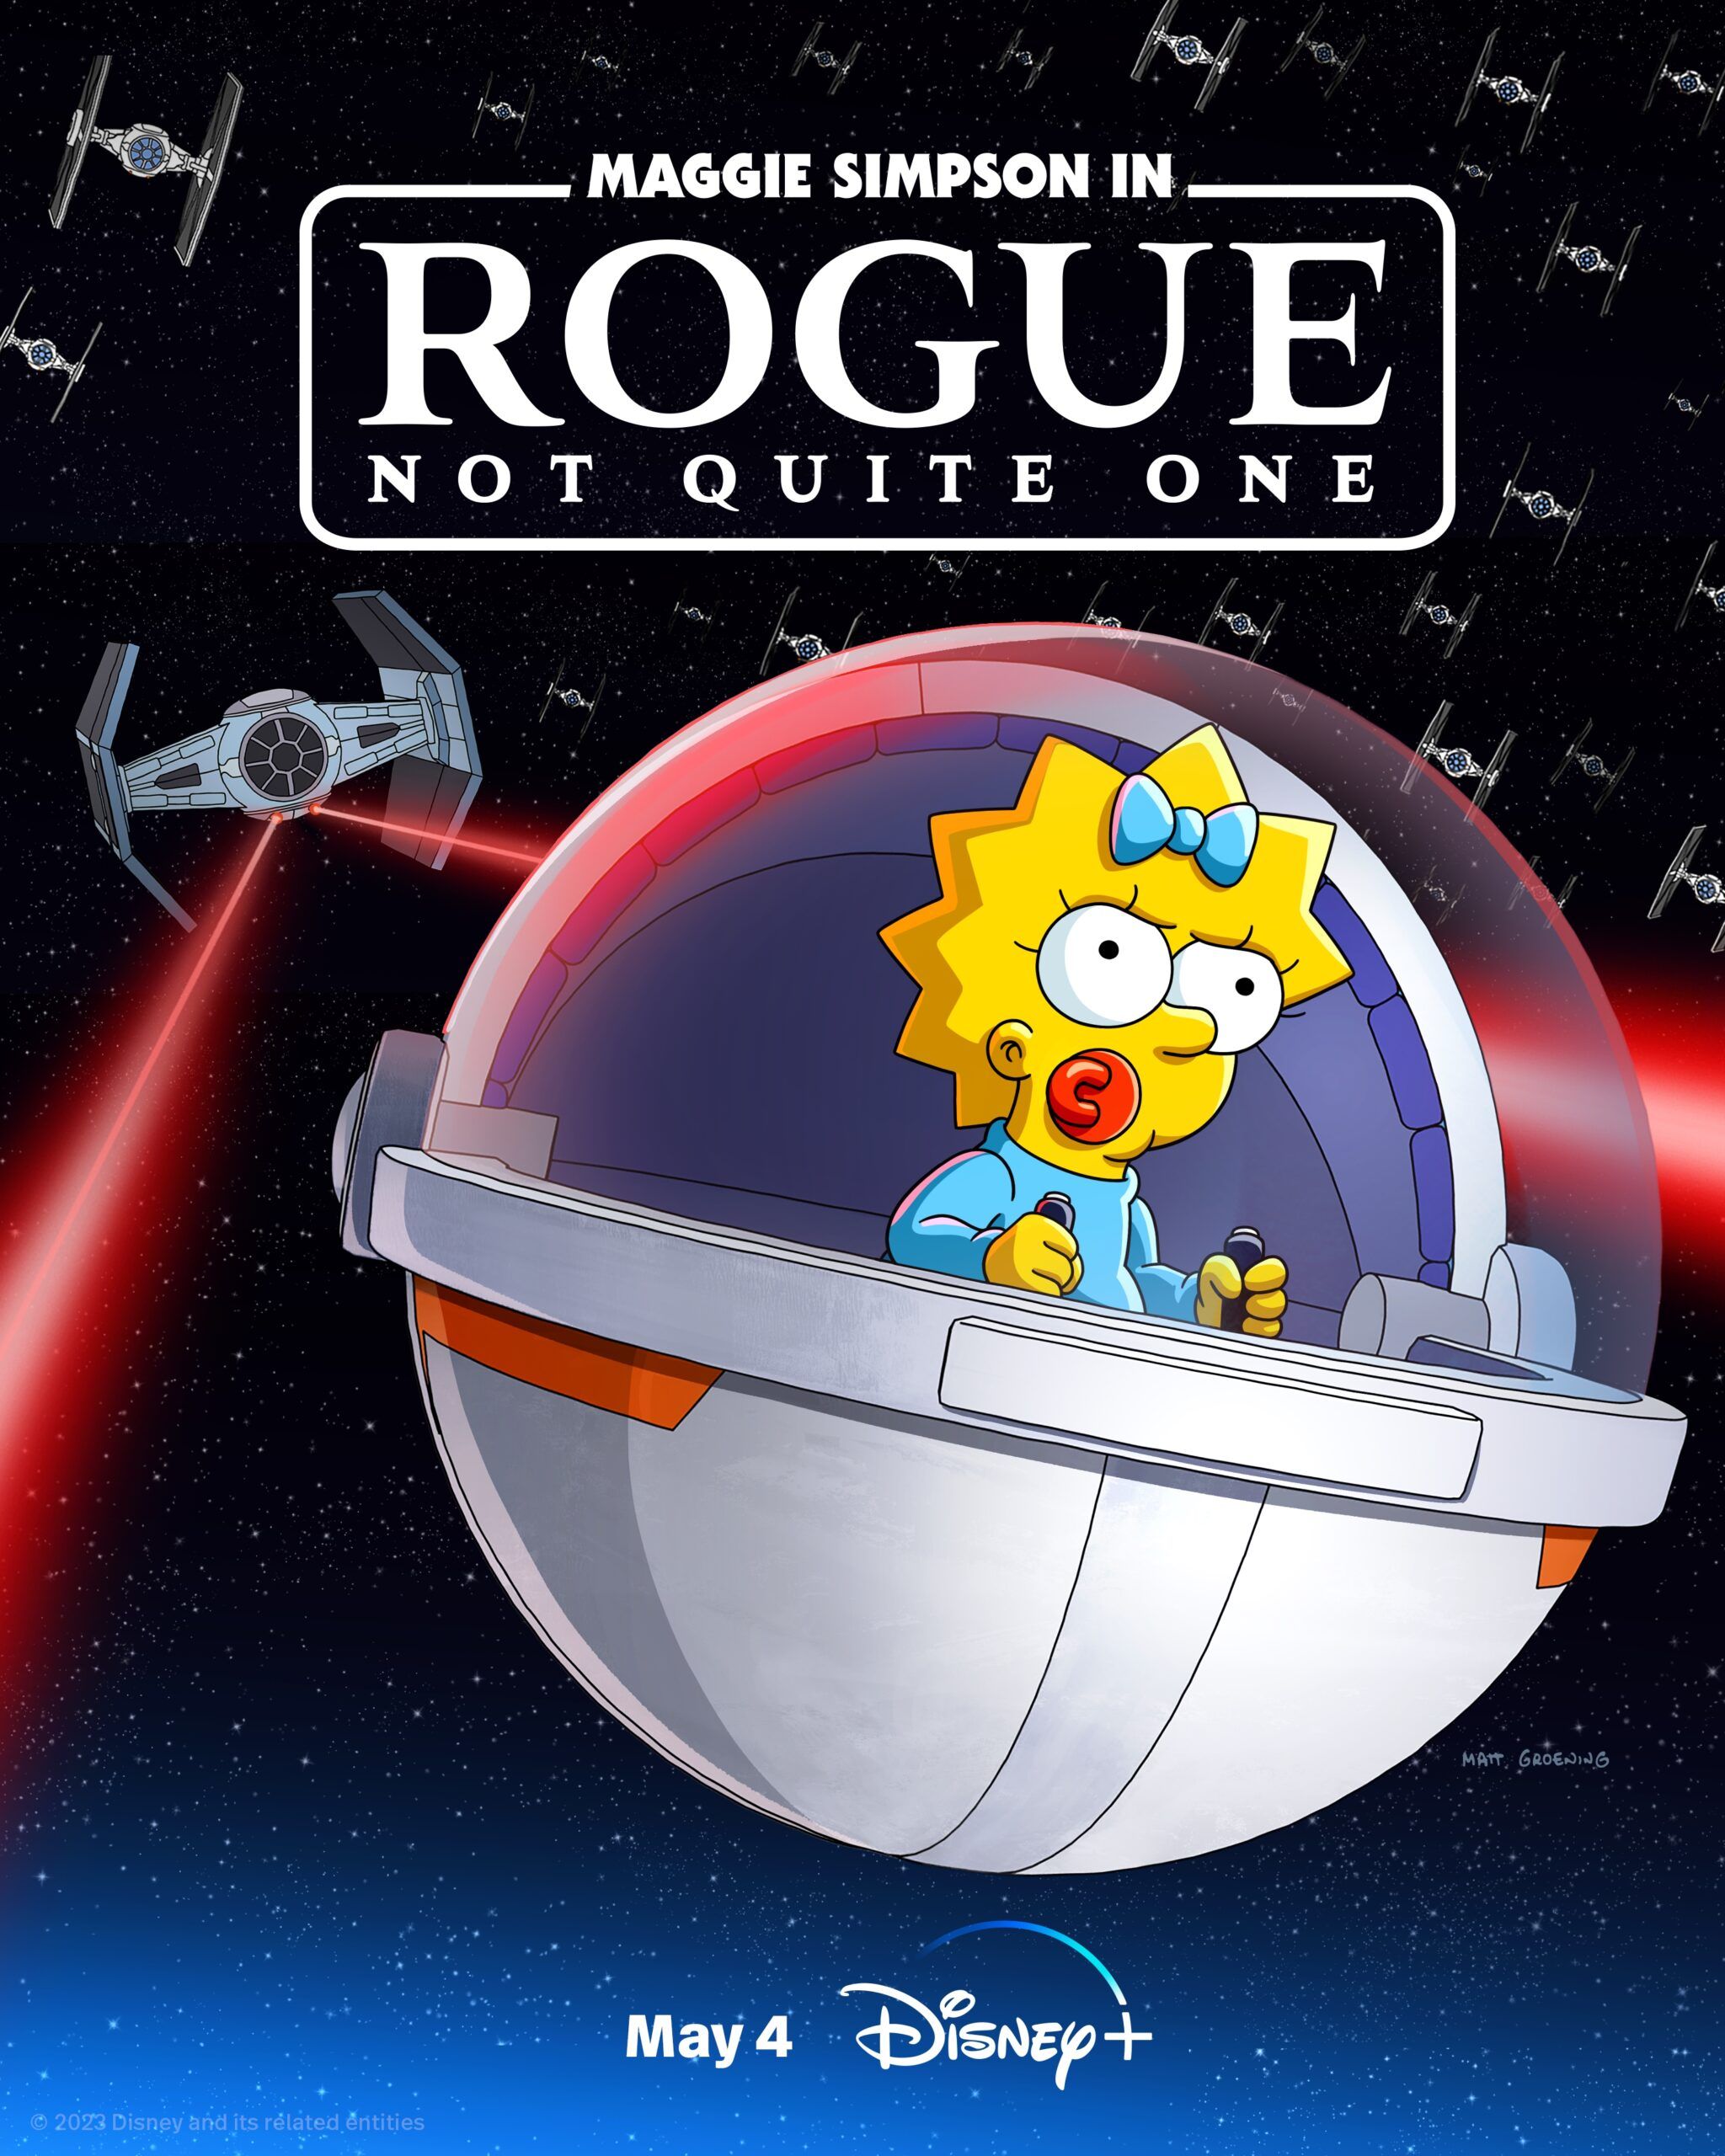 Maggie Simpson in Baby Yoda's buggy